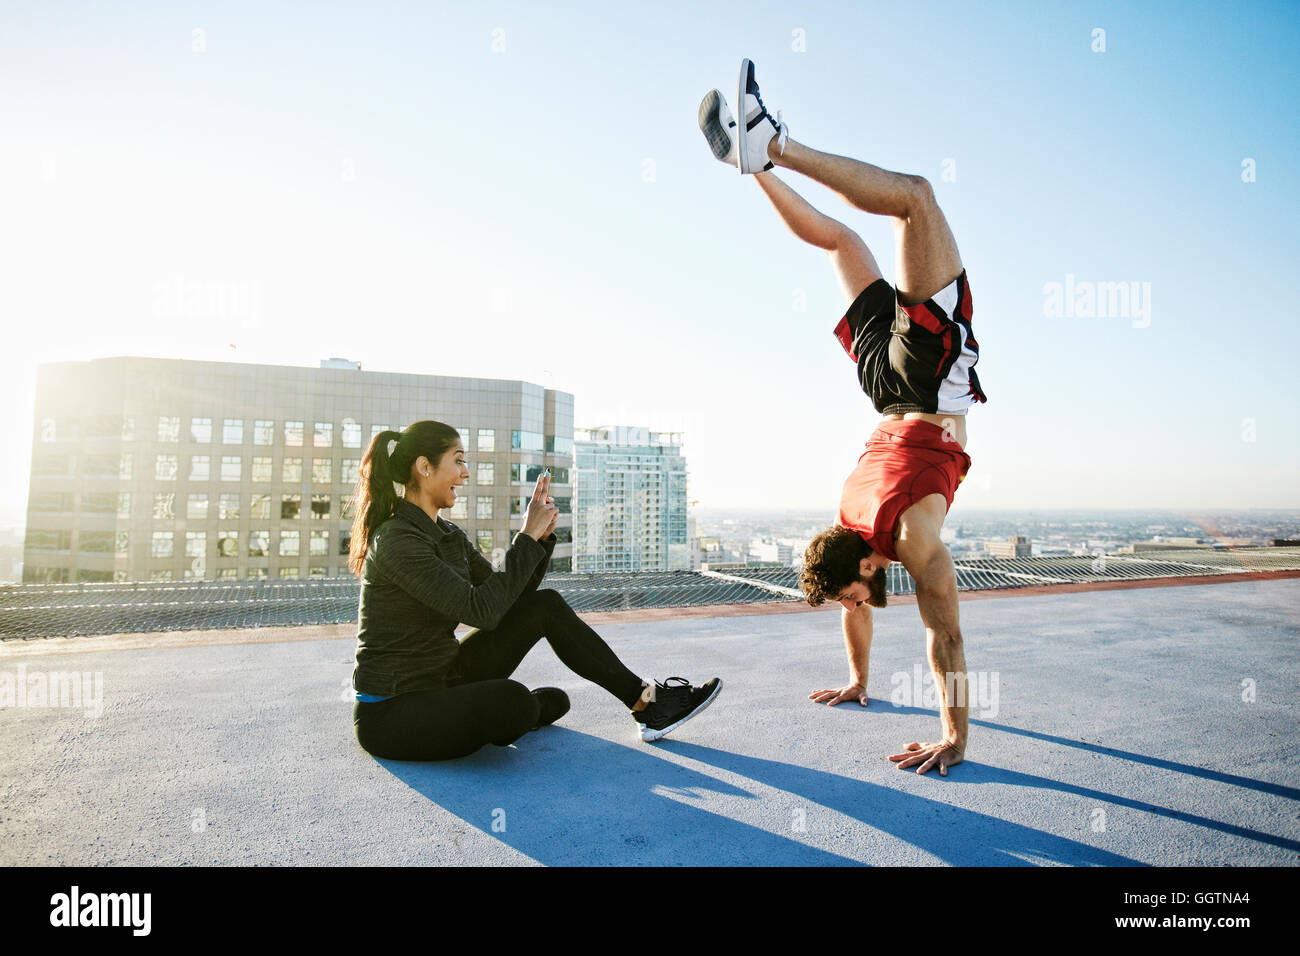 Woman photographing man doing handstand on urban rooftop Stock Photo